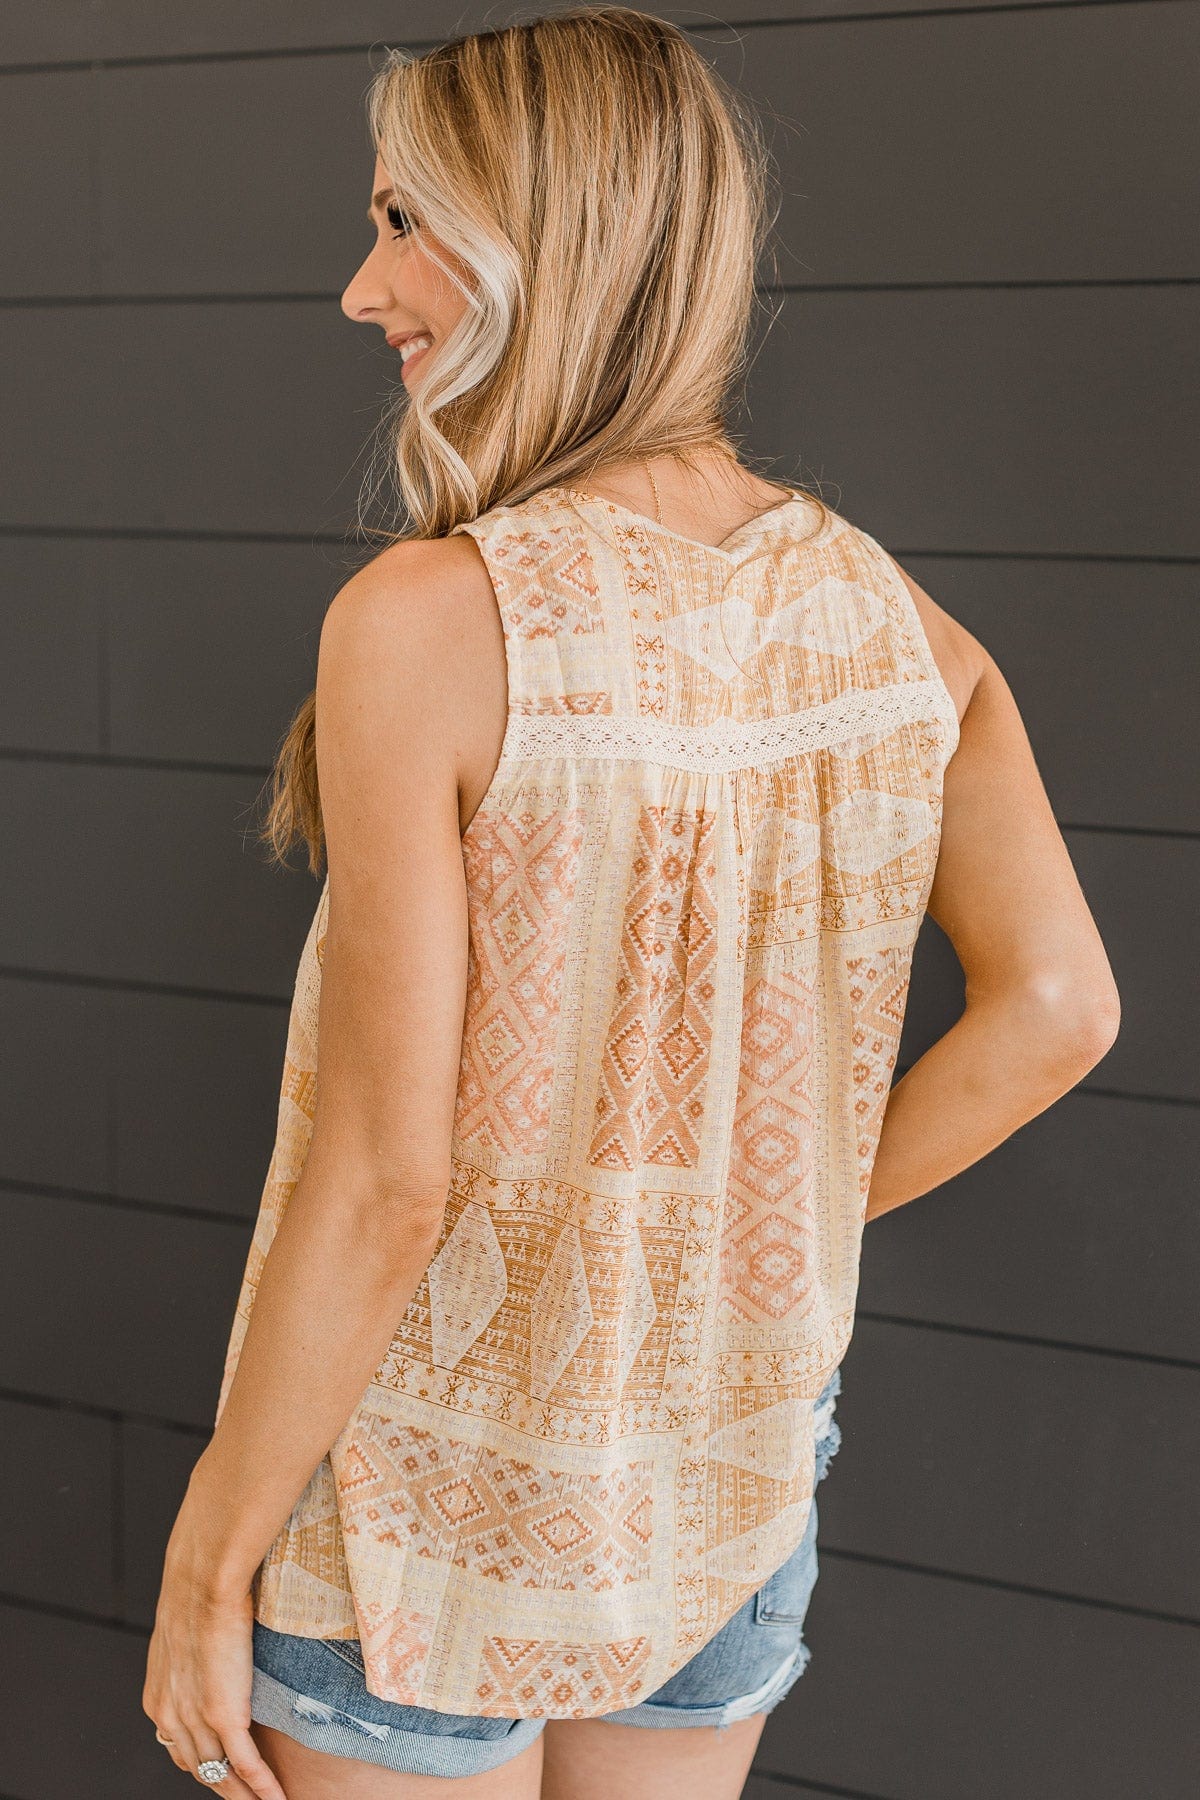 Most Perfect Moment Tank Top- Dusty Peach